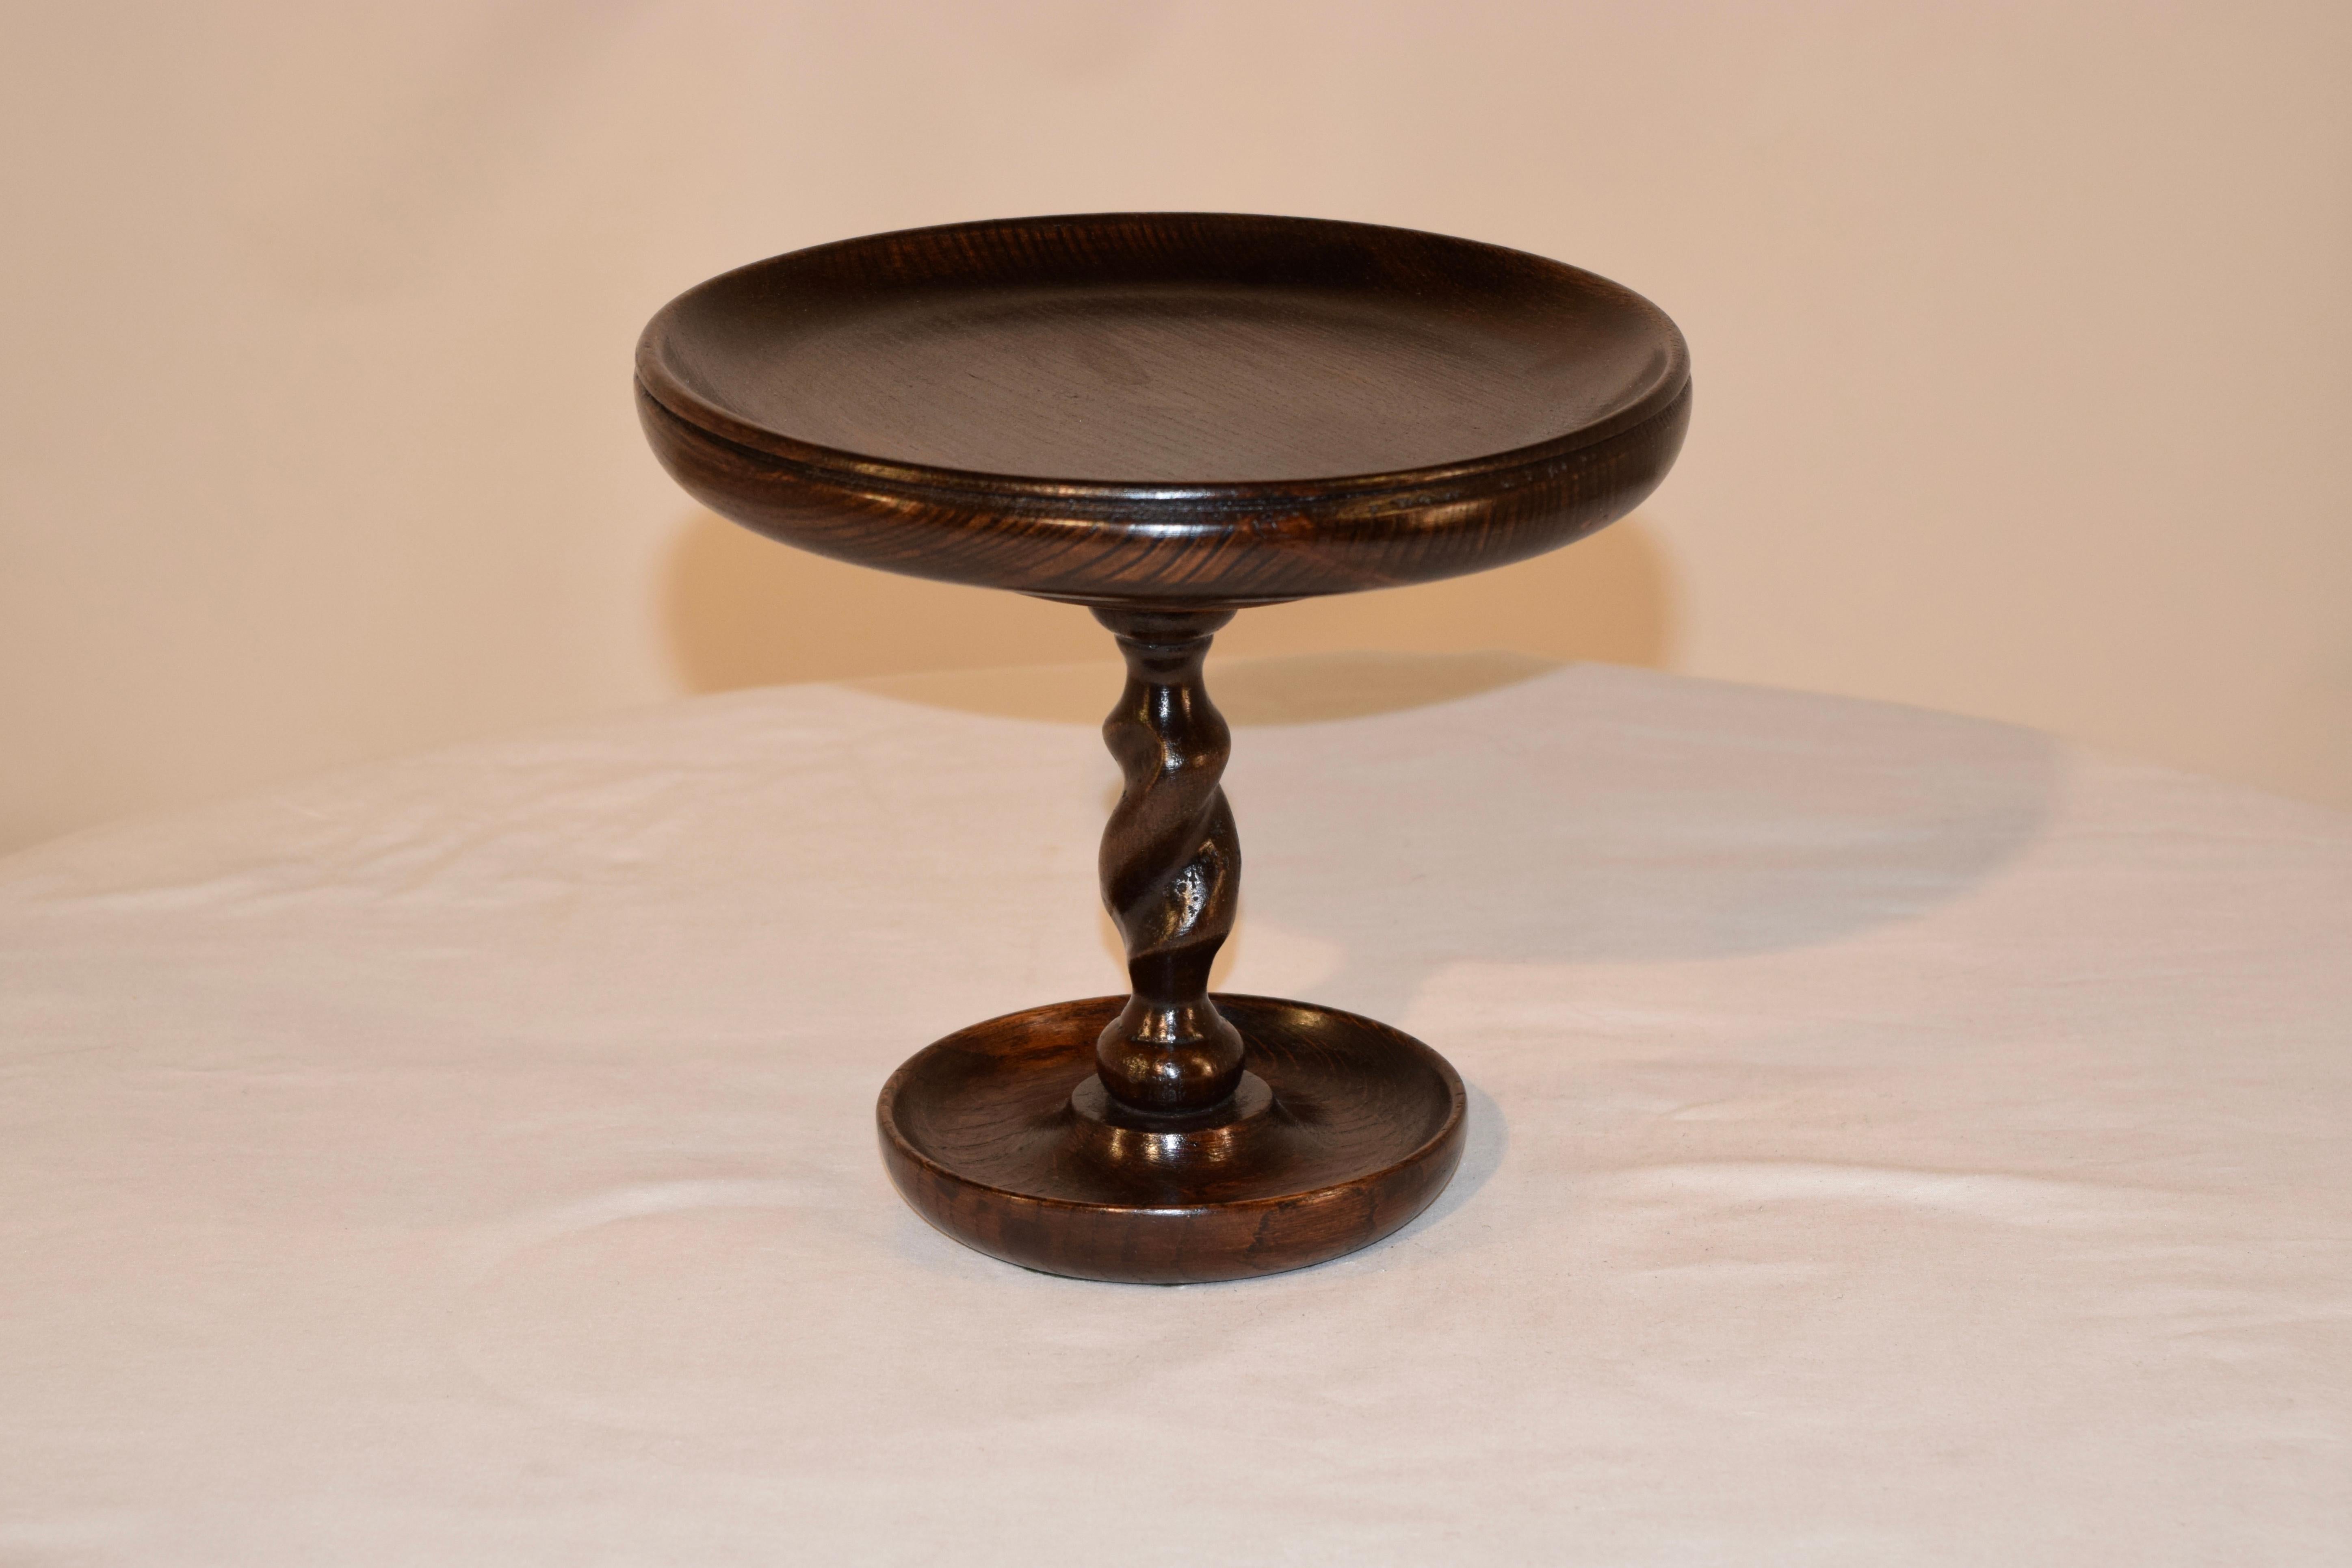 Late 19th century hand turned oak compote from England with a bowl shaped top which has a molded edge, supported on a hand turned barley twist column and hand turned dish shaped base.